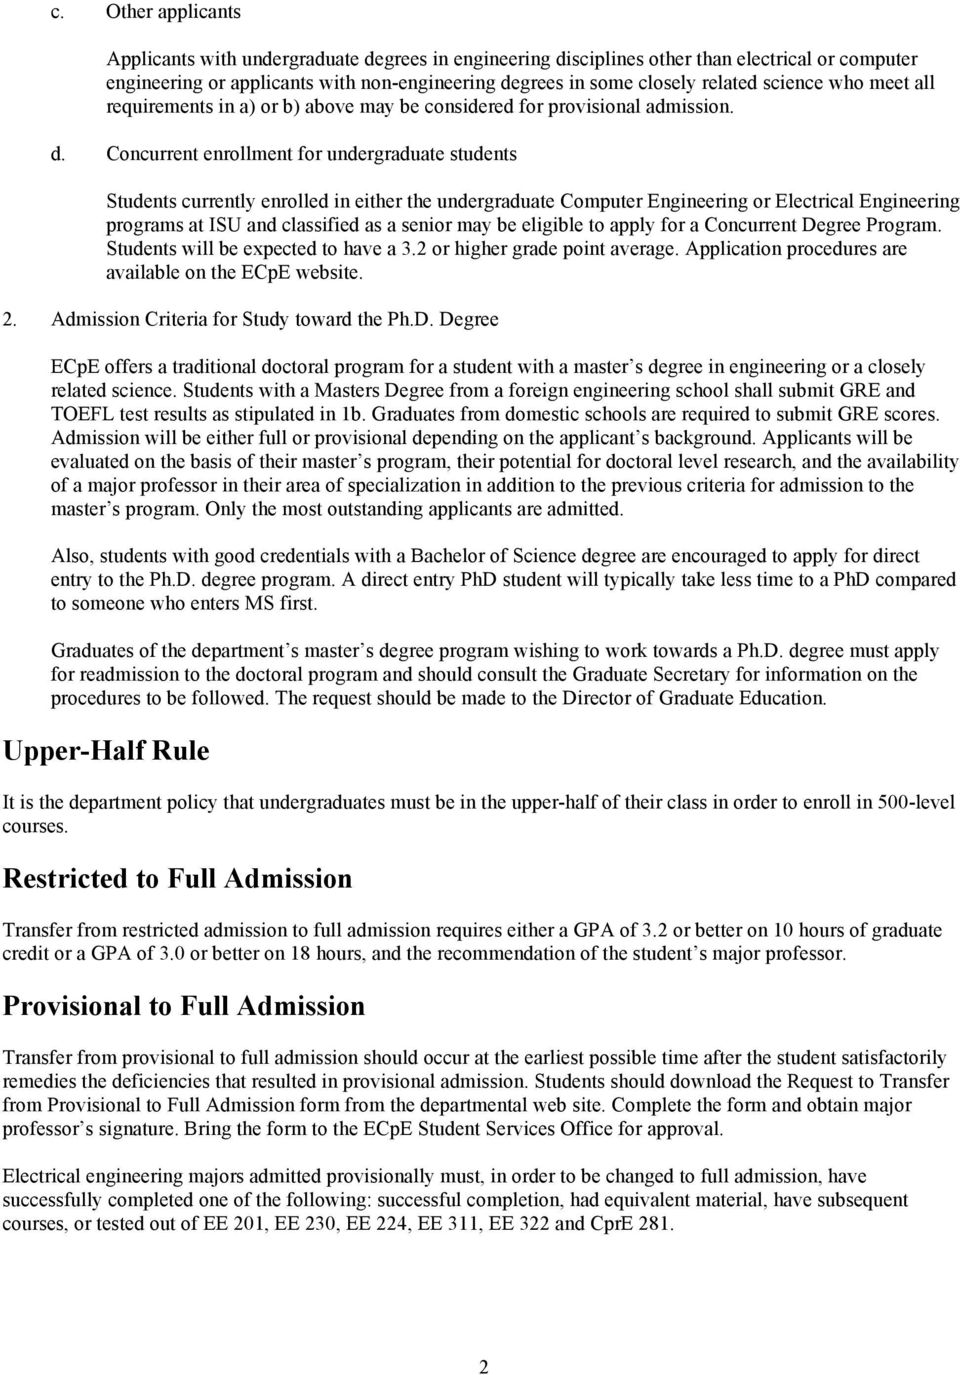 Concurrent enrollment for undergraduate students Students currently enrolled in either the undergraduate Computer Engineering or Electrical Engineering programs at ISU and classified as a senior may